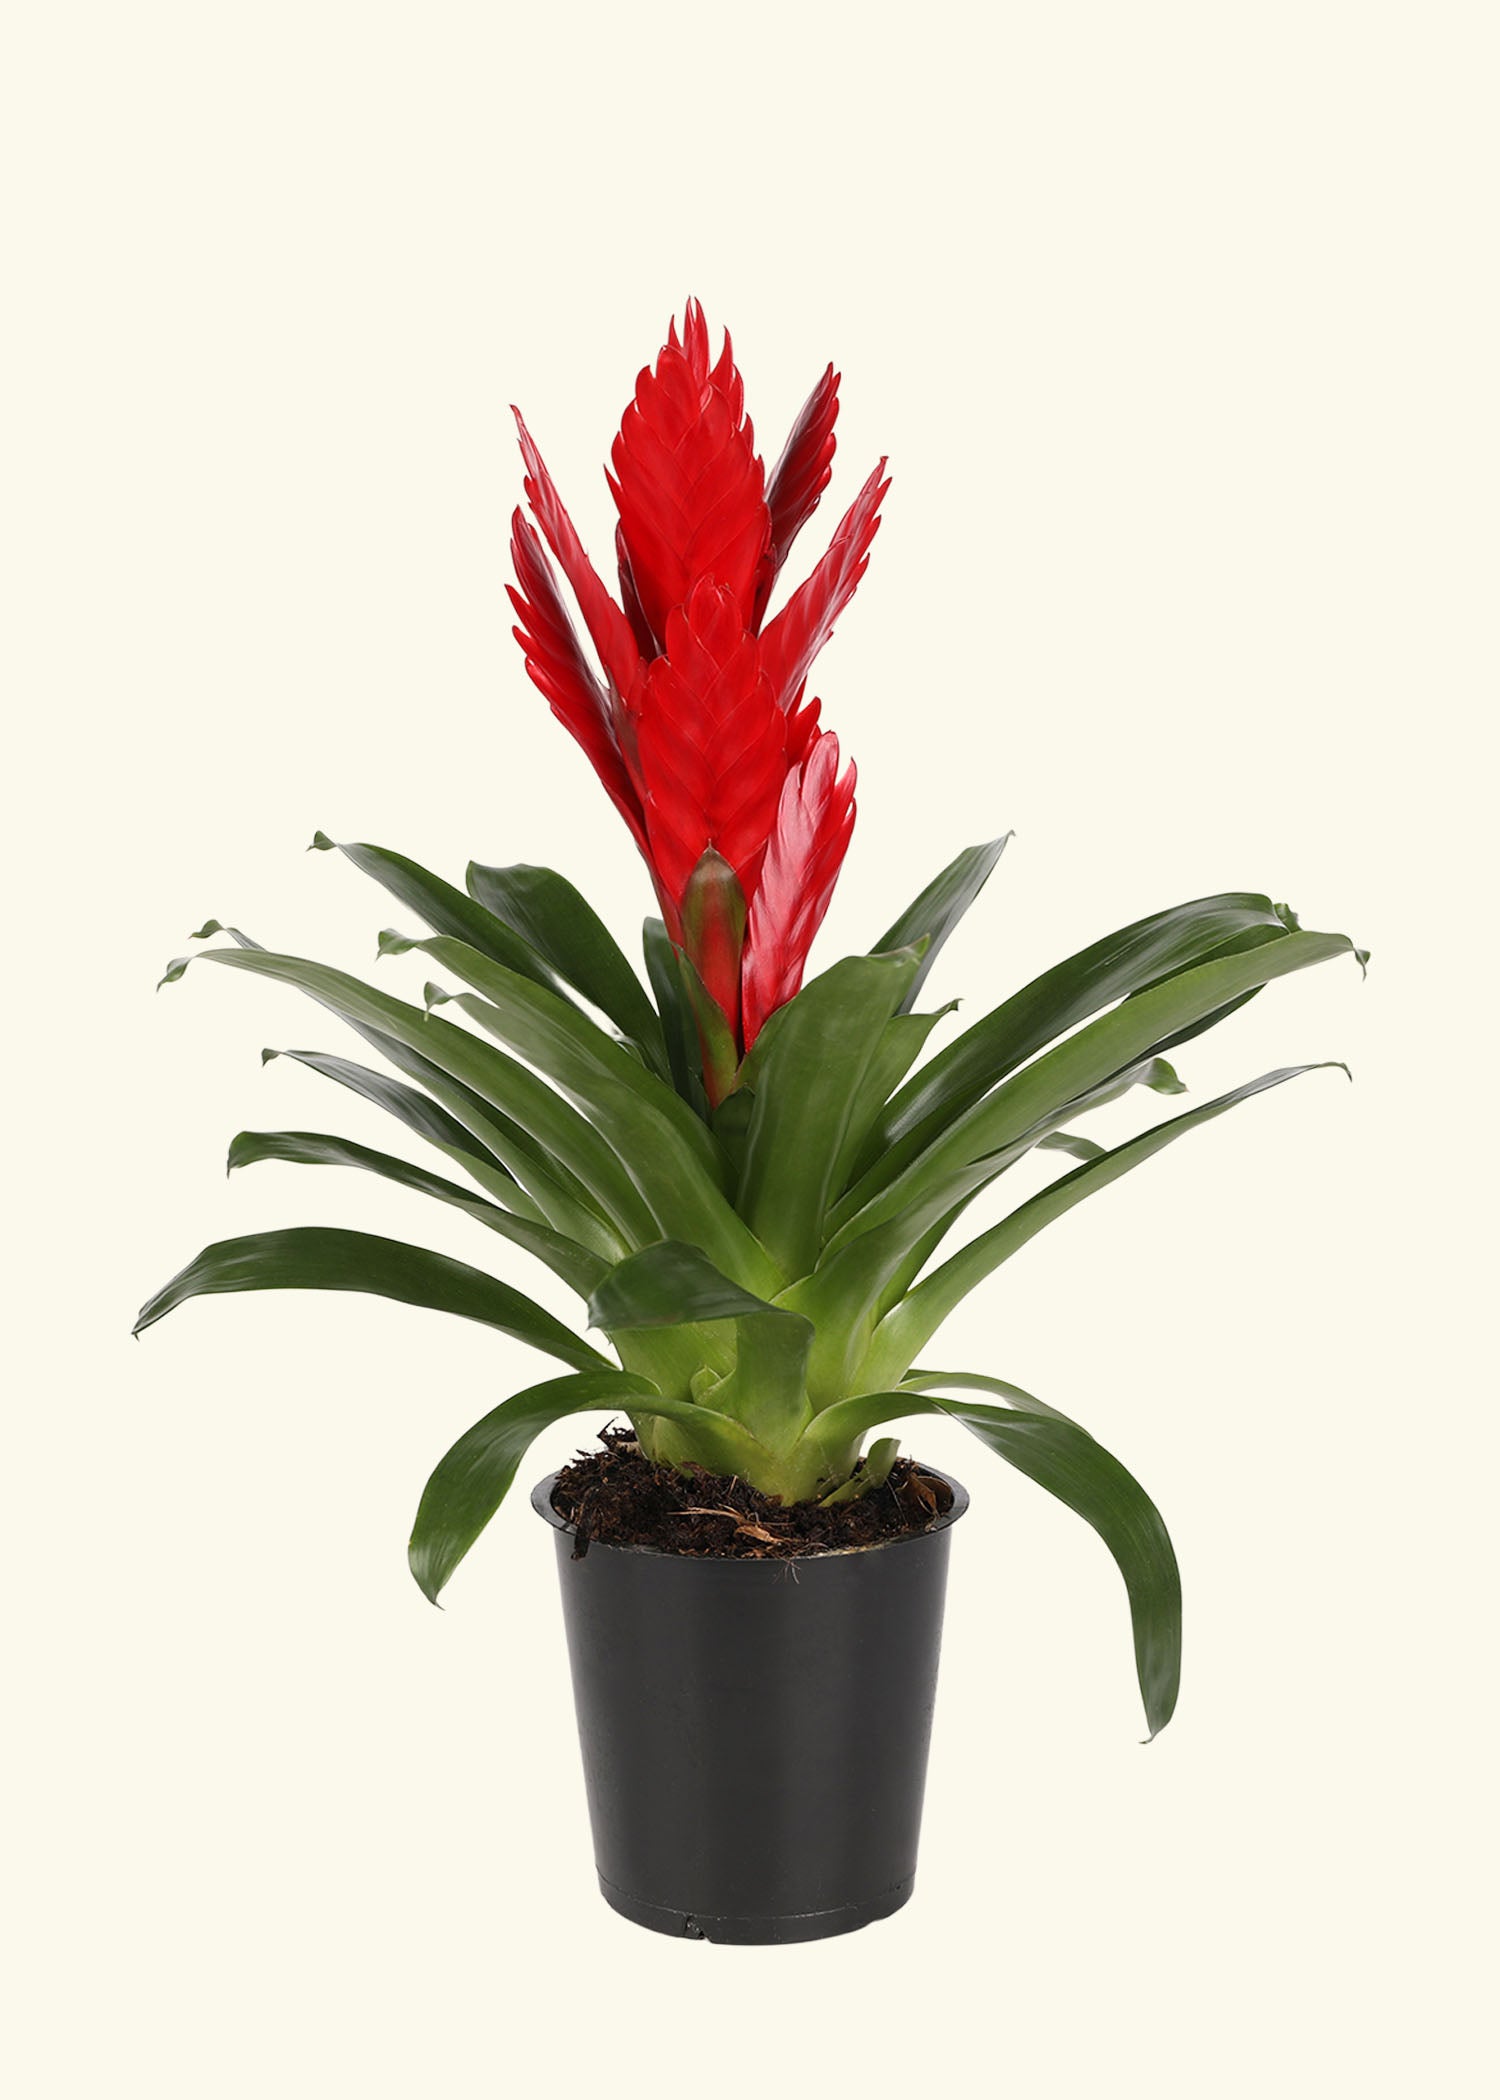 Small Red Bromeliad in a grow pot.